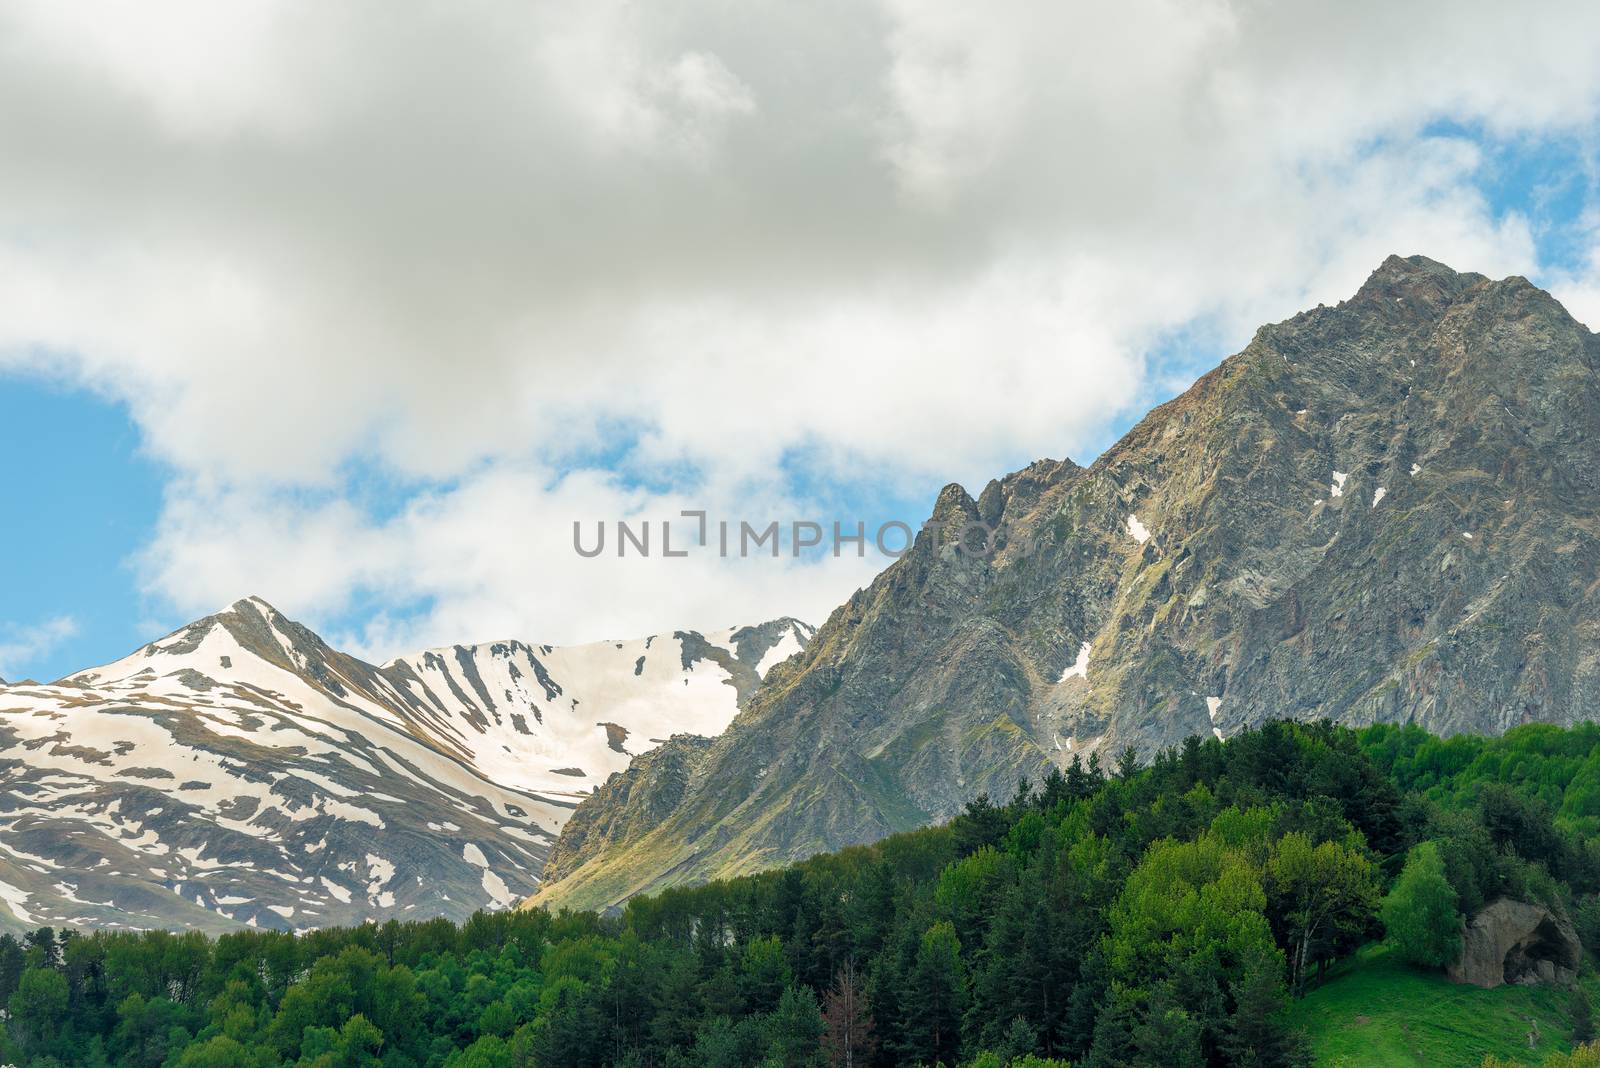 High mountains with remnants of snow on top in Georgia in summer by kosmsos111